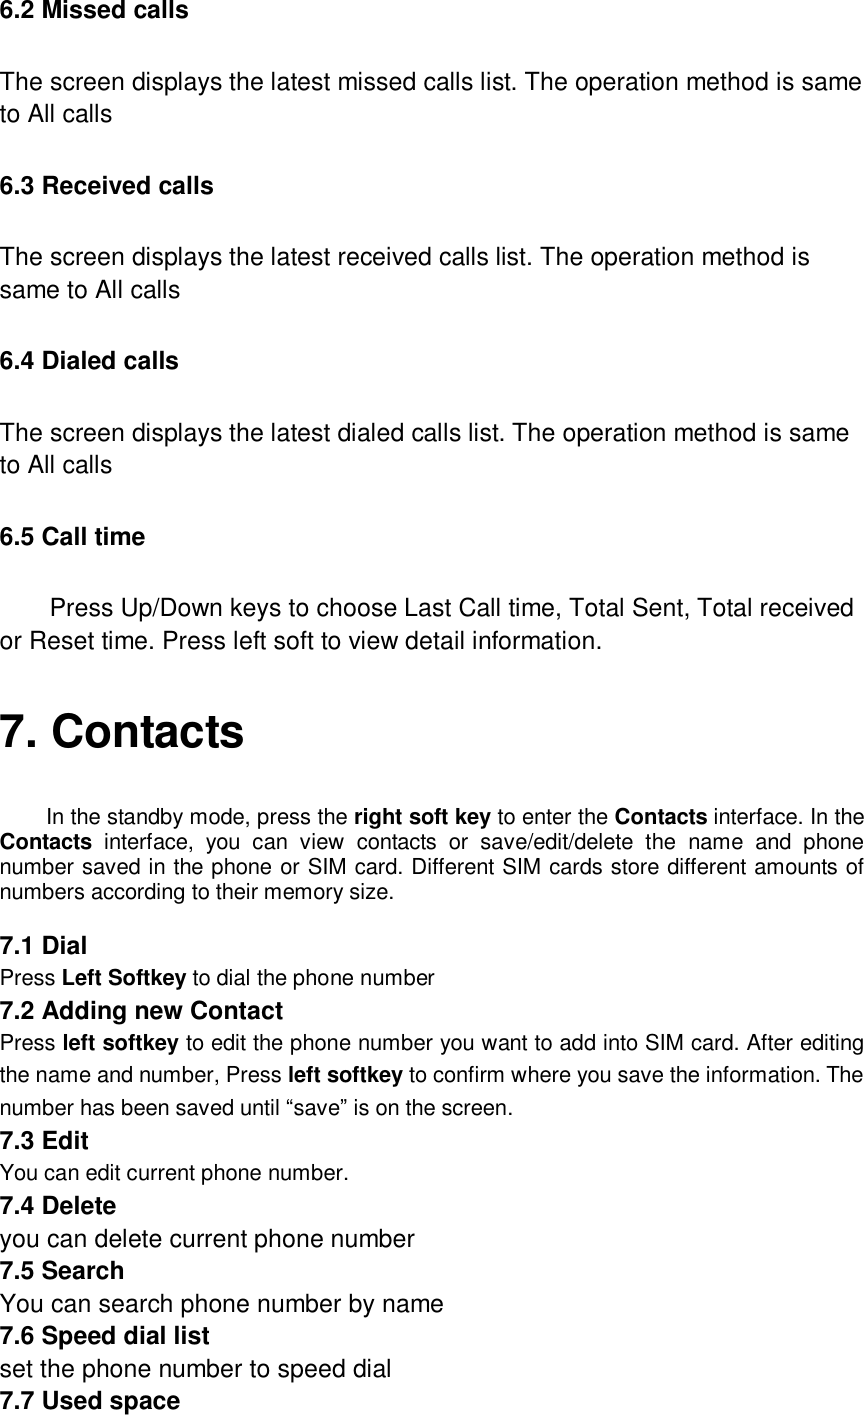  6.2 Missed calls The screen displays the latest missed calls list. The operation method is same to All calls 6.3 Received calls The screen displays the latest received calls list. The operation method is same to All calls 6.4 Dialed calls The screen displays the latest dialed calls list. The operation method is same to All calls 6.5 Call time Press Up/Down keys to choose Last Call time, Total Sent, Total received or Reset time. Press left soft to view detail information. 7. Contacts  In the standby mode, press the right soft key to enter the Contacts interface. In the Contacts interface, you can view contacts or save/edit/delete the name and phone number saved in the phone or SIM card. Different SIM cards store different amounts of numbers according to their memory size.  7.1 Dial Press Left Softkey to dial the phone number 7.2 Adding new Contact Press left softkey to edit the phone number you want to add into SIM card. After editing the name and number, Press left softkey to confirm where you save the information. The number has been saved until “save” is on the screen. 7.3 Edit You can edit current phone number. 7.4 Delete you can delete current phone number 7.5 Search You can search phone number by name 7.6 Speed dial list set the phone number to speed dial 7.7 Used space 